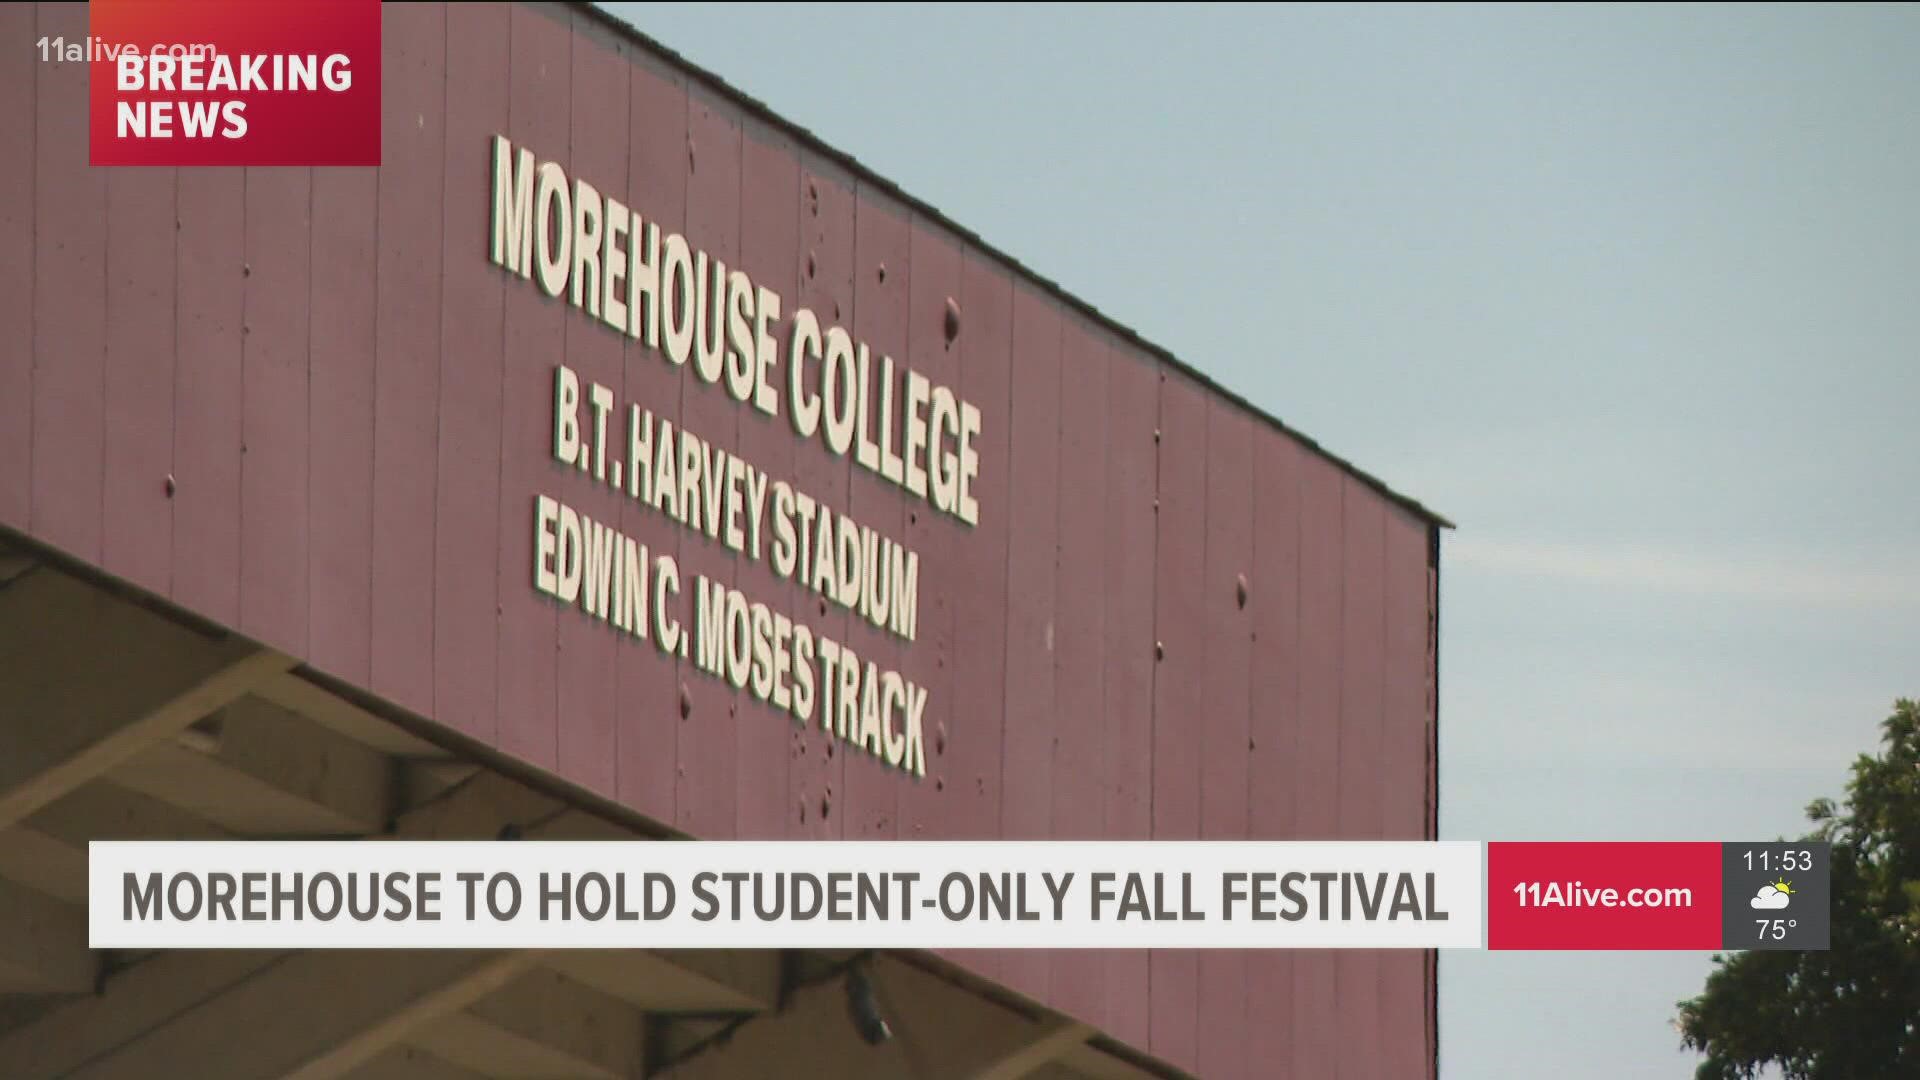 Morehouse announced the move on Friday.